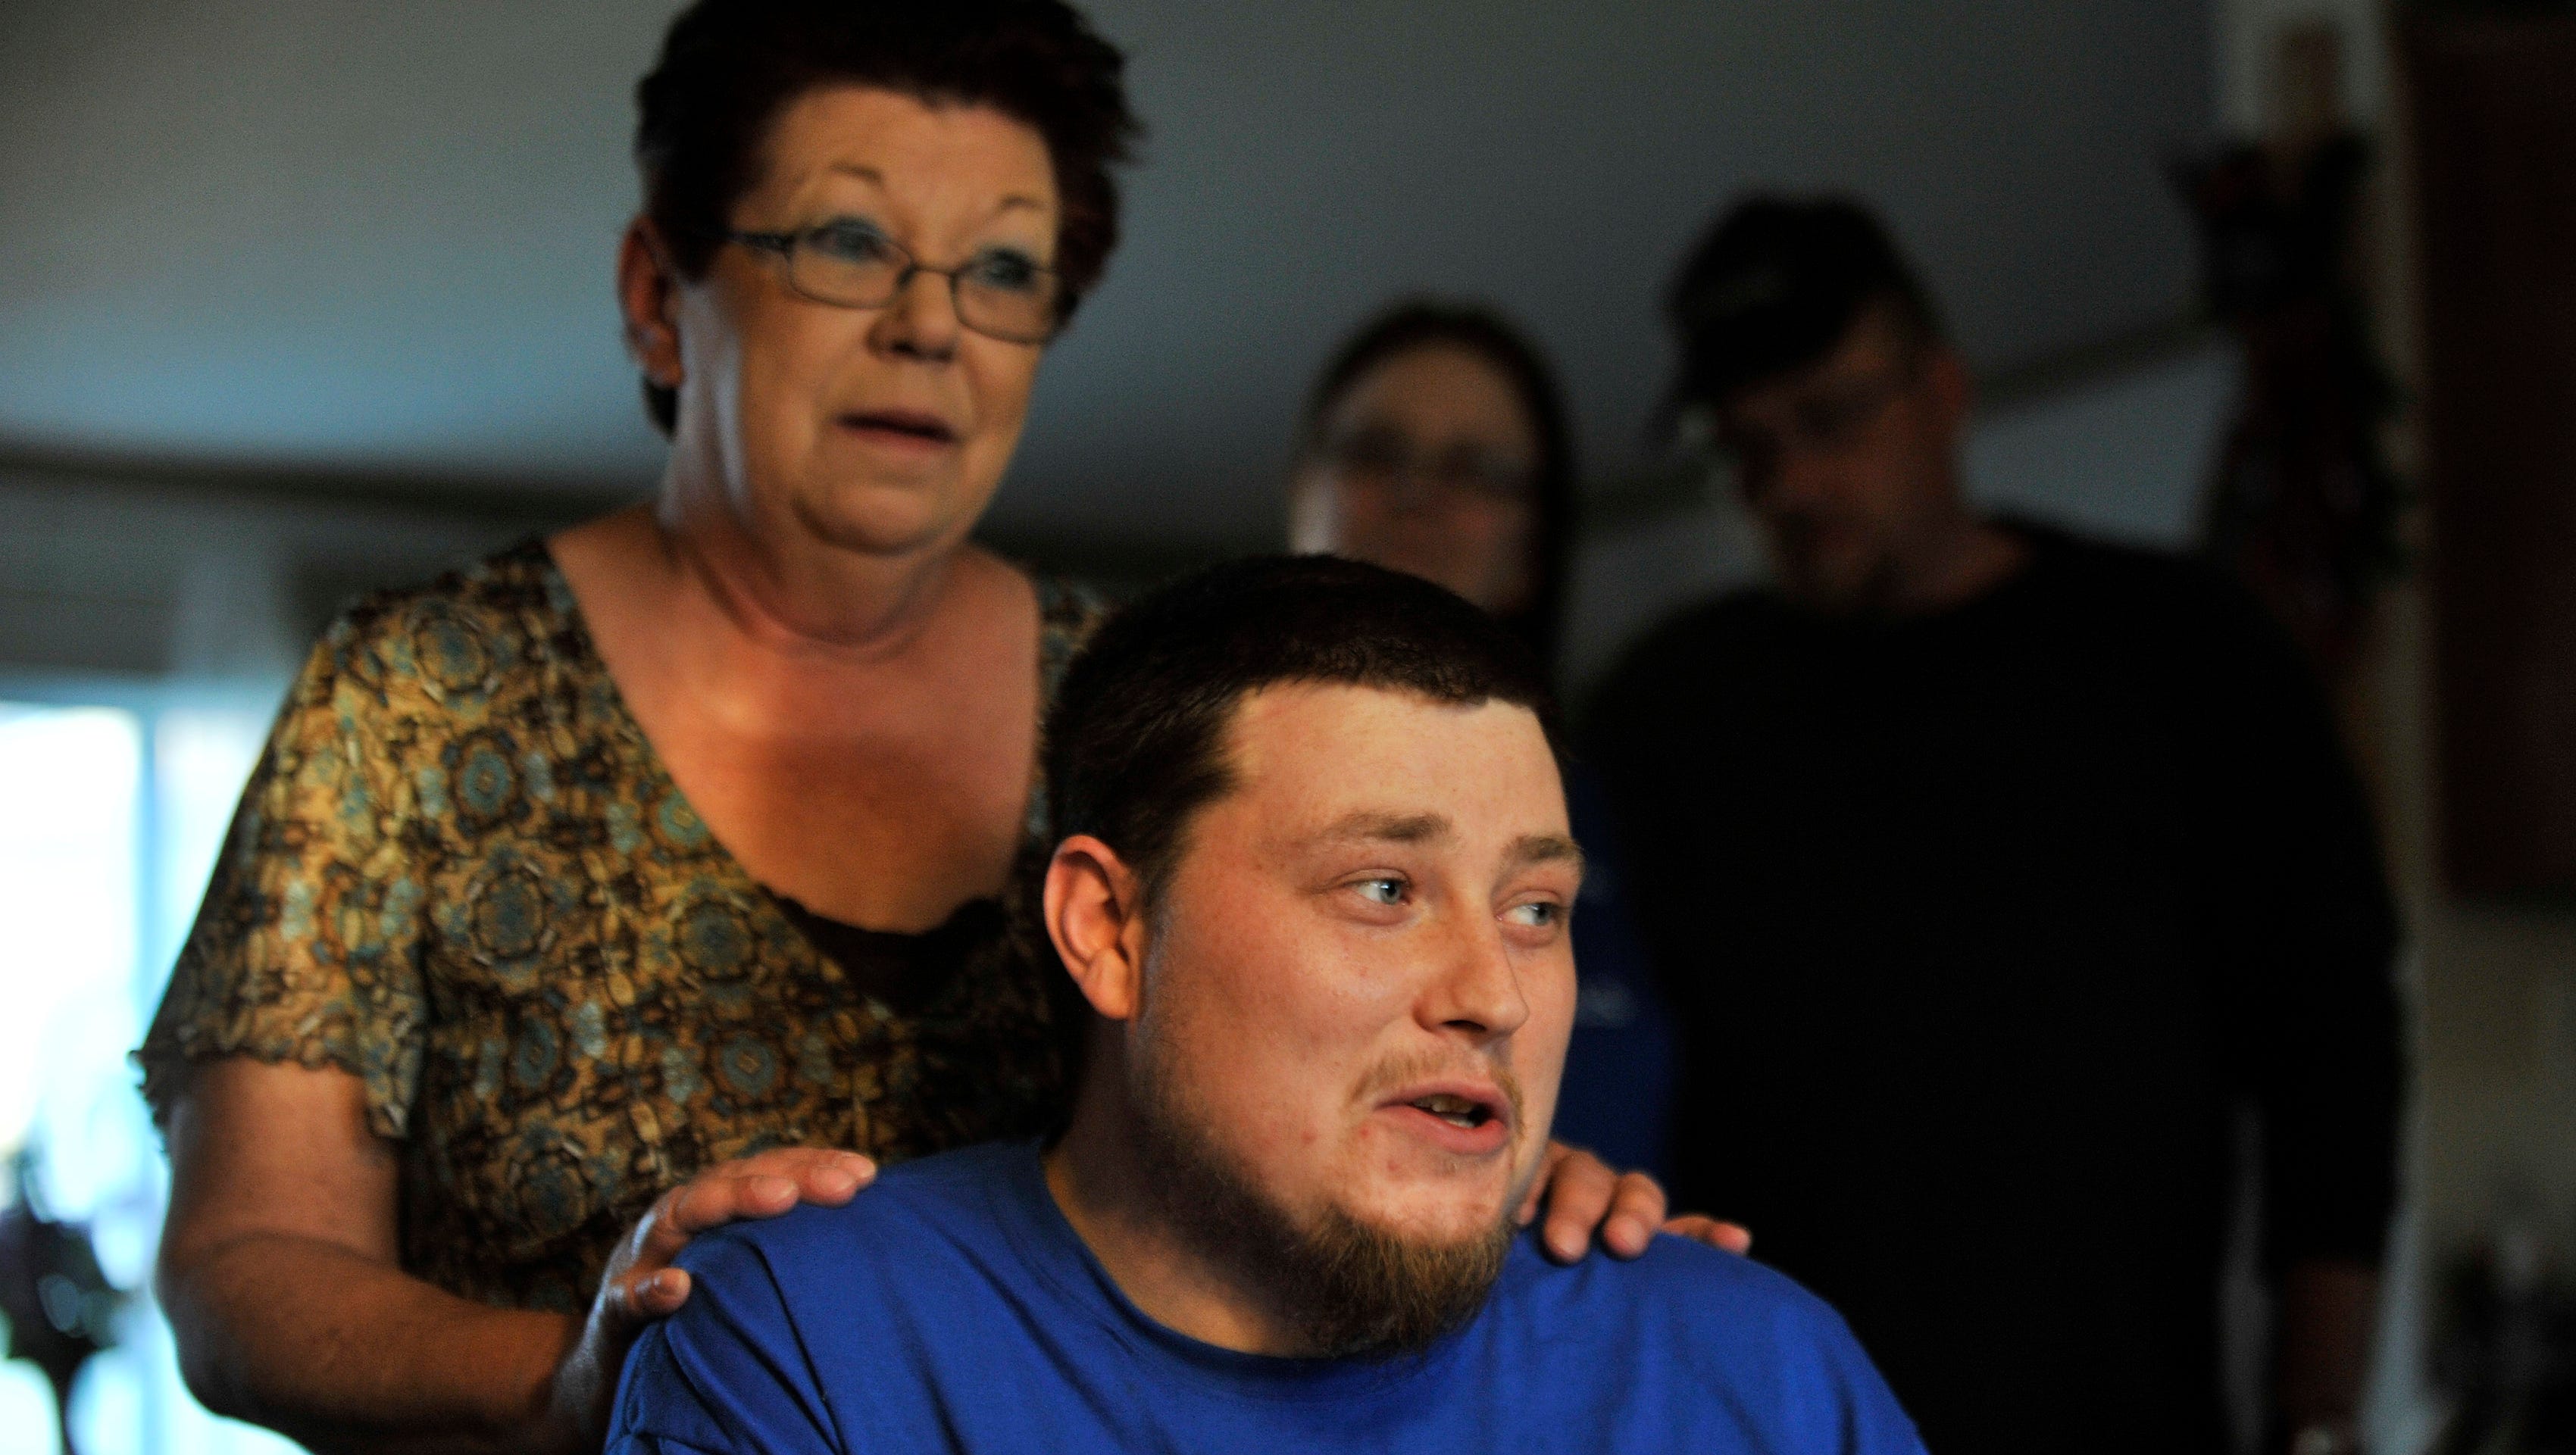 With his mother, Sallie Gutherie, Lucas Gutherie, 26, discusses having ALS after a Sunday family meal at Sallie's home in Addison Township on Nov. 2, 2014. Lucas, 26, has the same disease that killed his father, Chuck, last year. The Sunday family meal has become a tradition since his father's diagnosis.